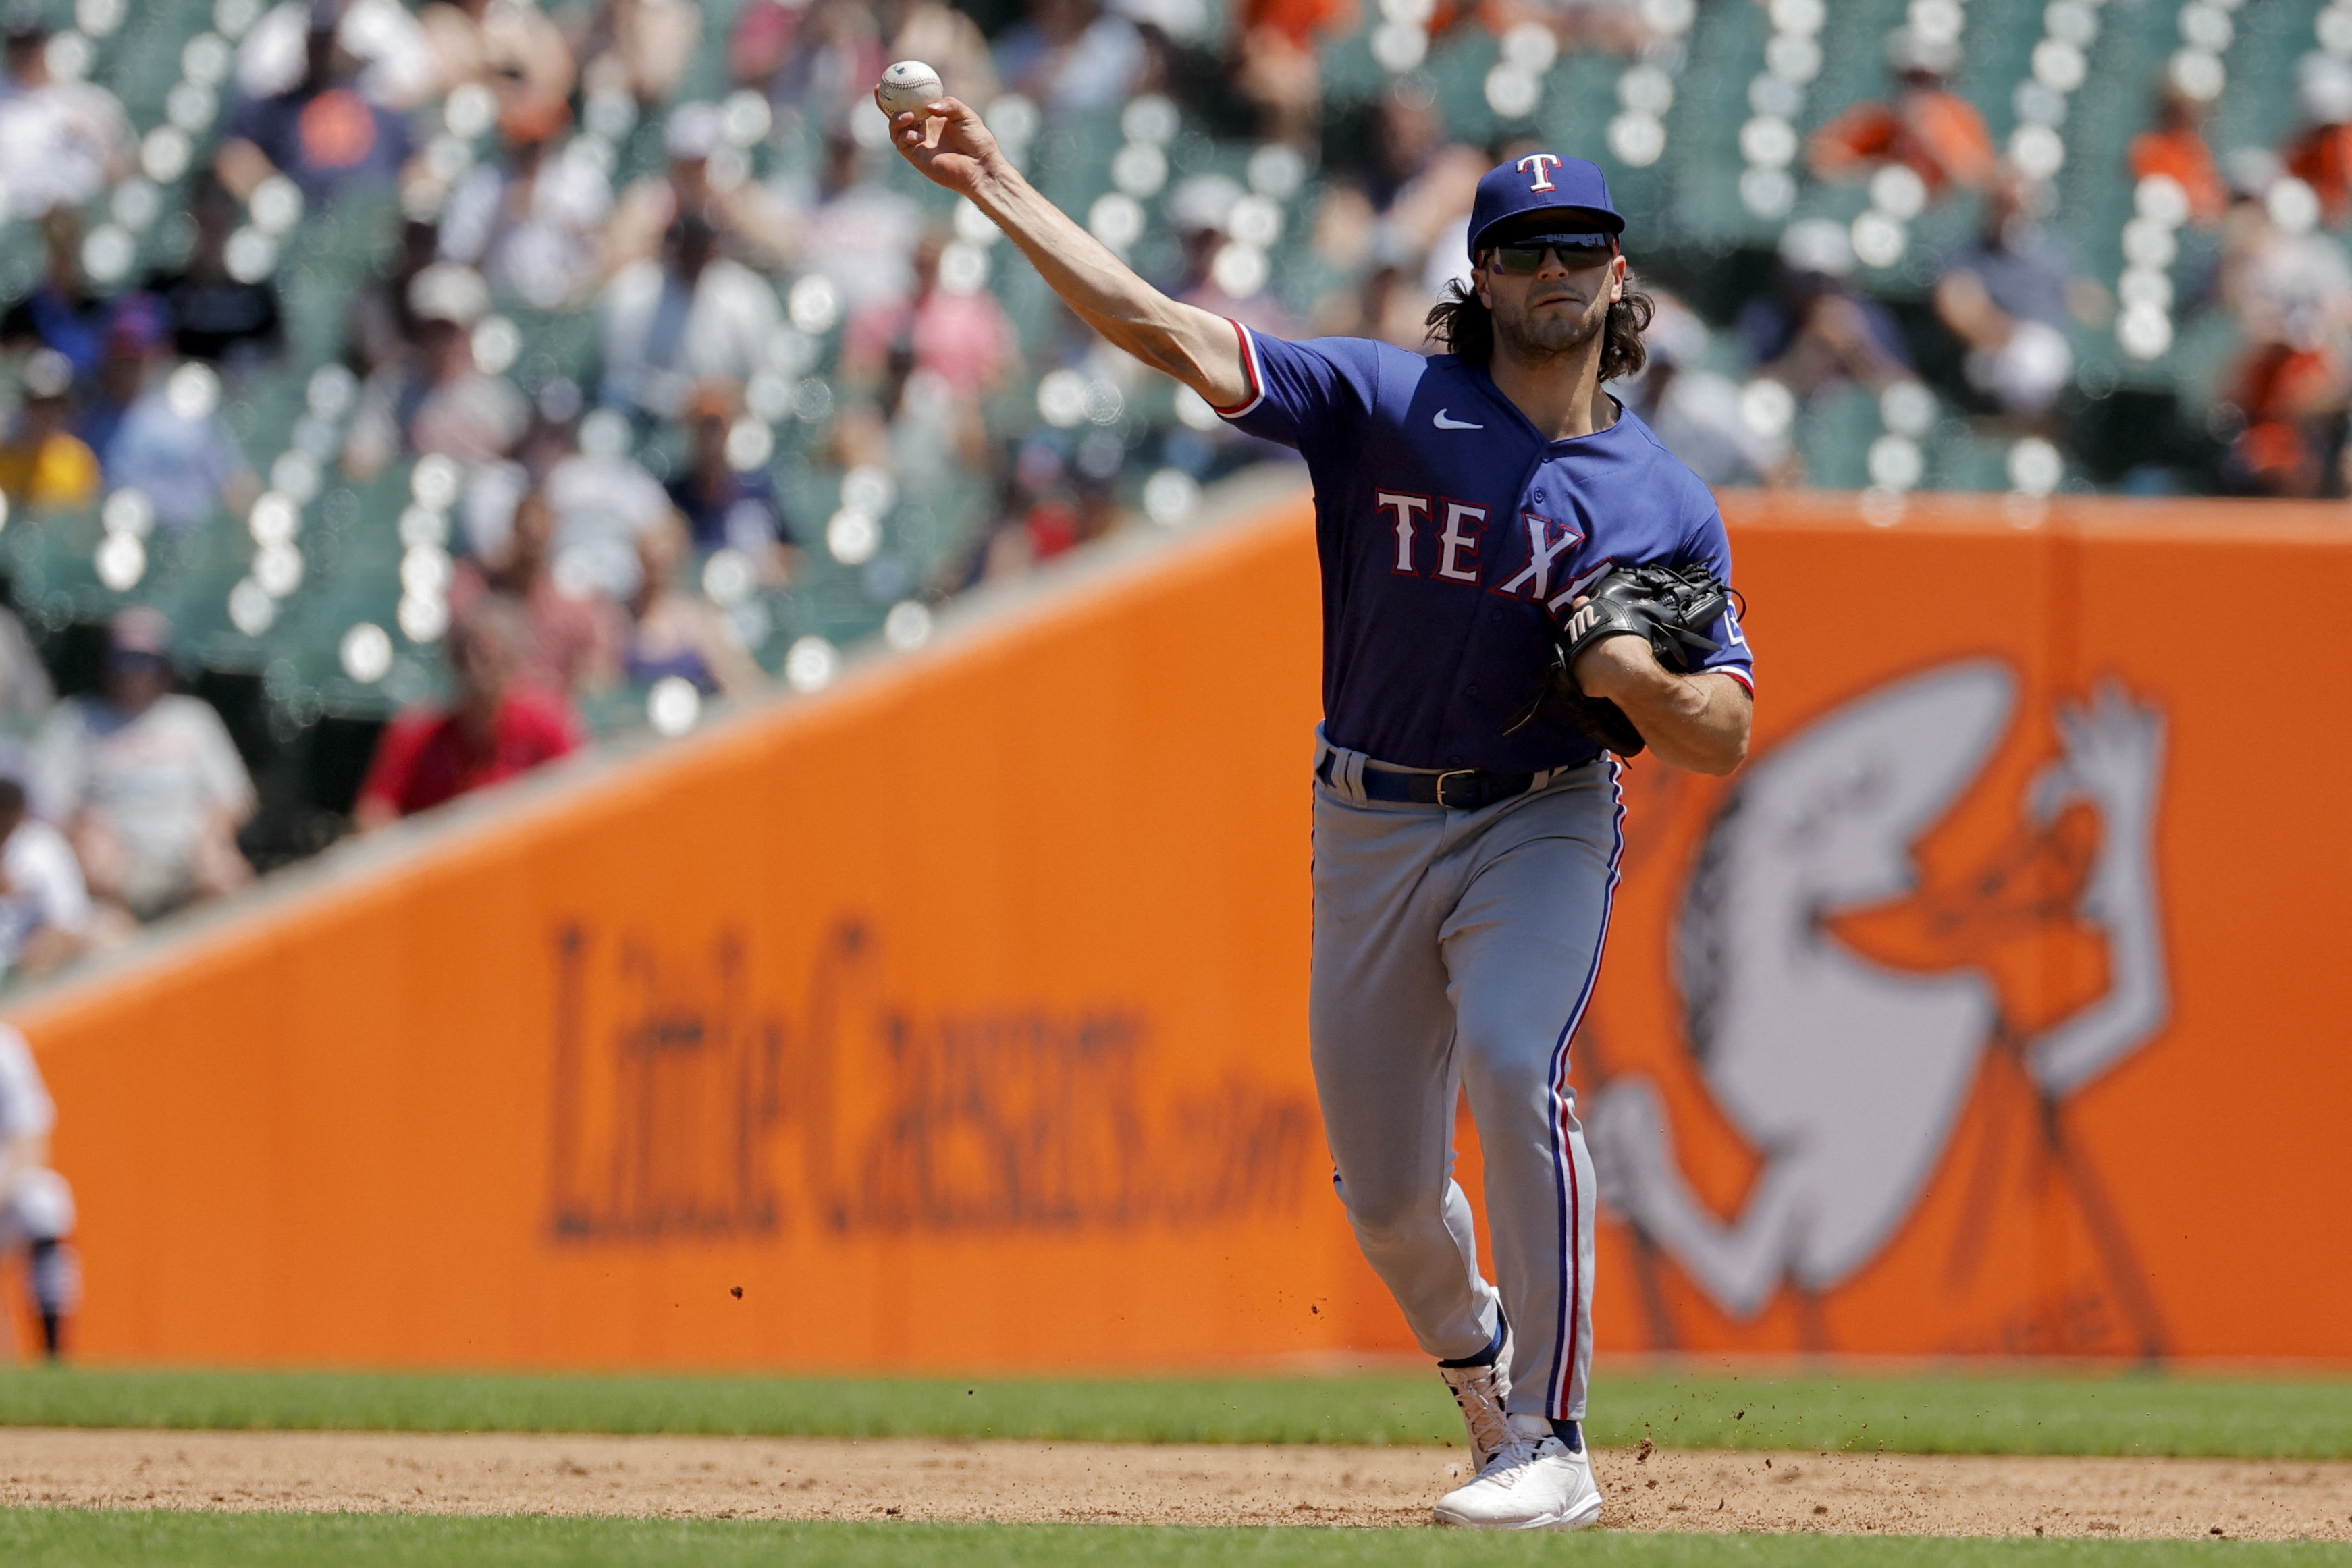 Detroit Tigers: Jake Marisnick has panned out well early on